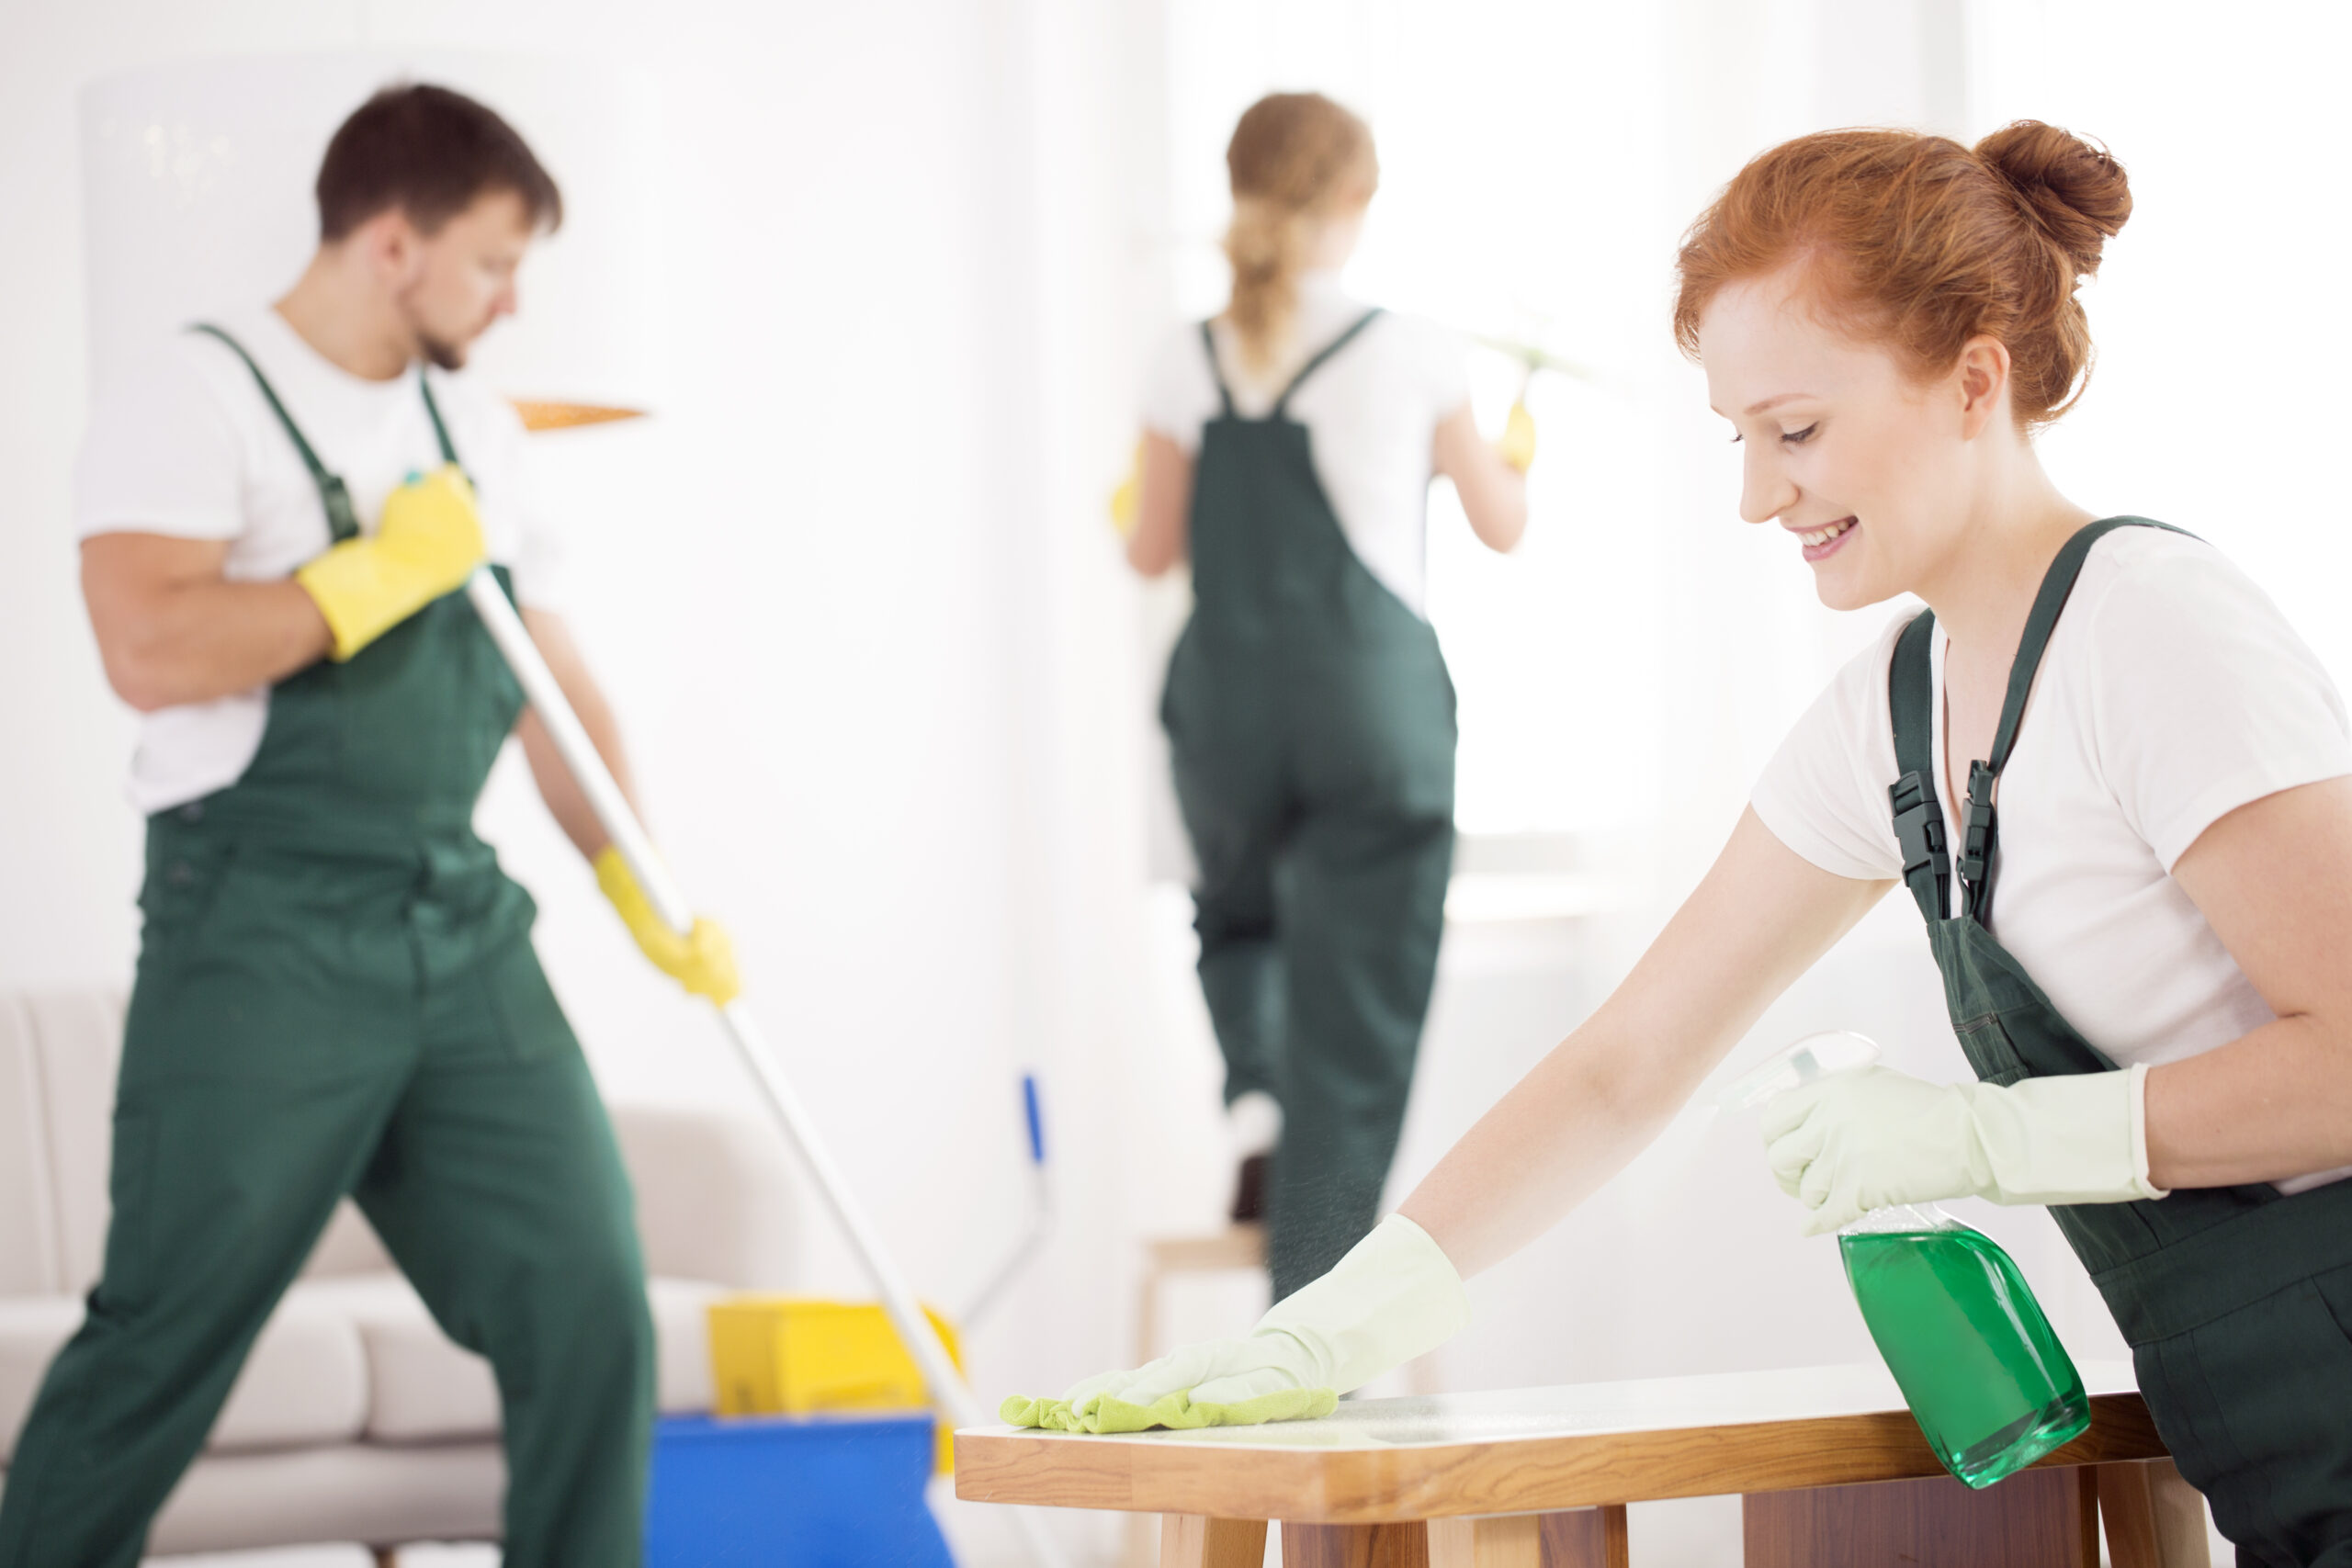 Cleaning service during work. Woman wiping a table while a man is washing the floor and other lady is cleaning the window